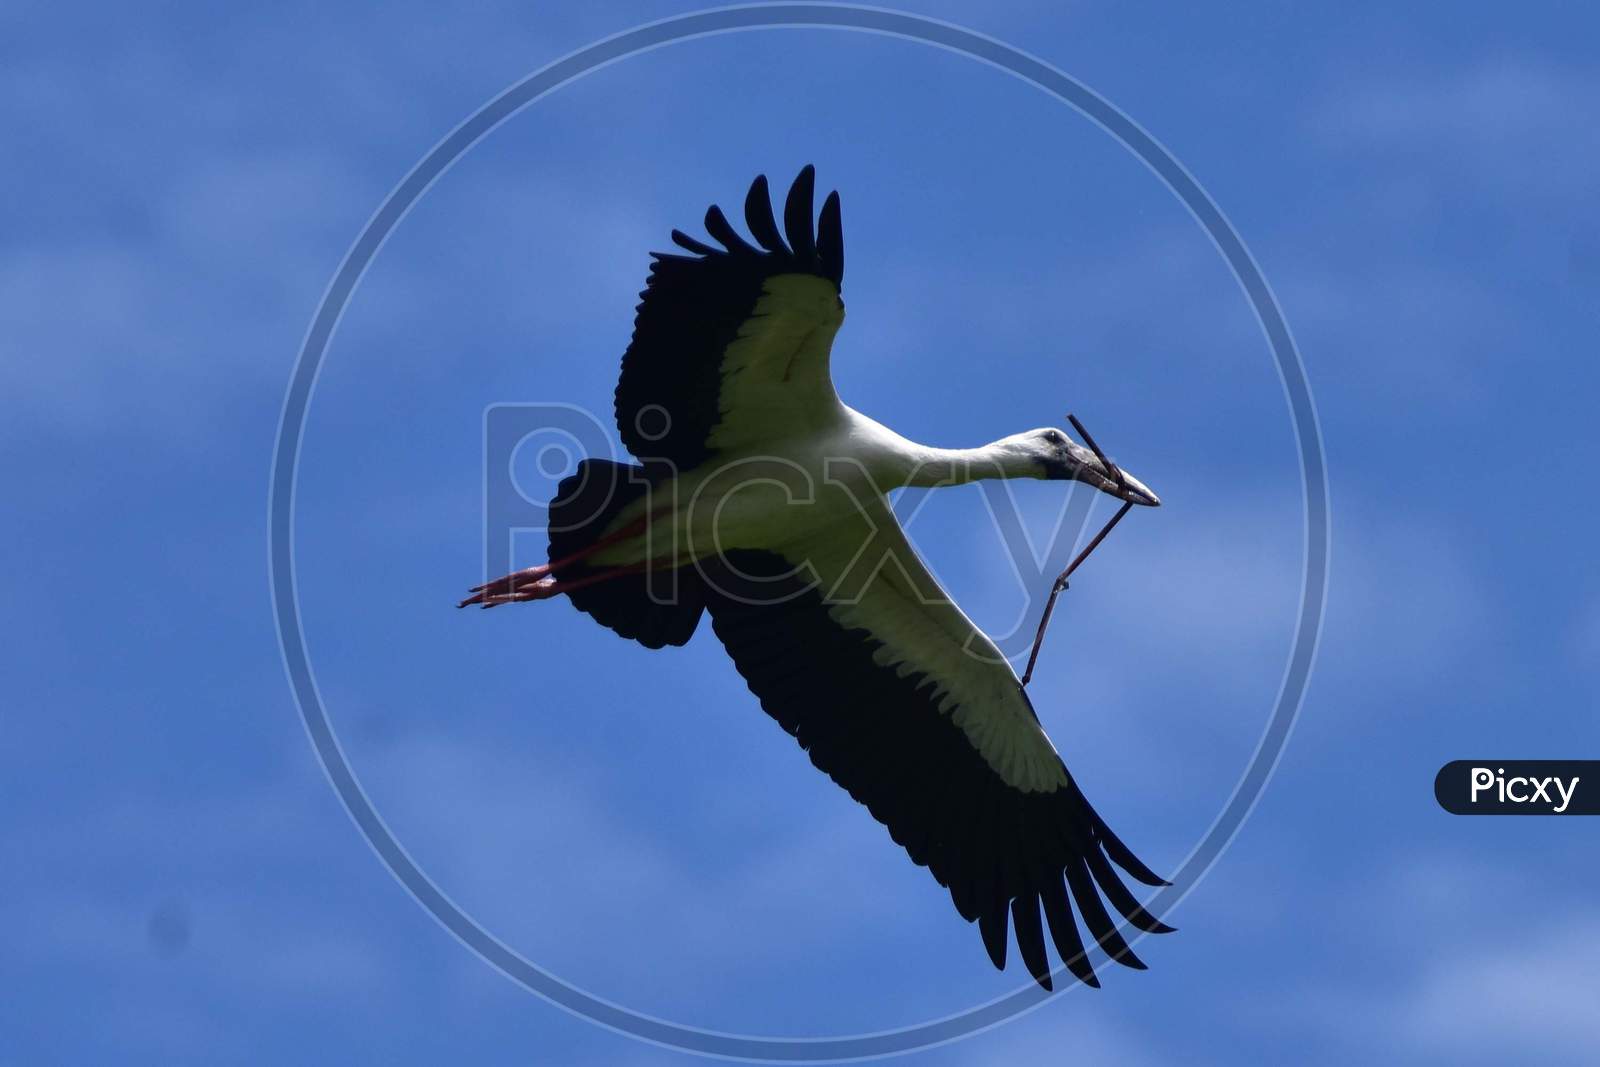 Openbill Stork is Seen During The Monsoon Season, In Nagaon District Of Assam On June 19, 2020